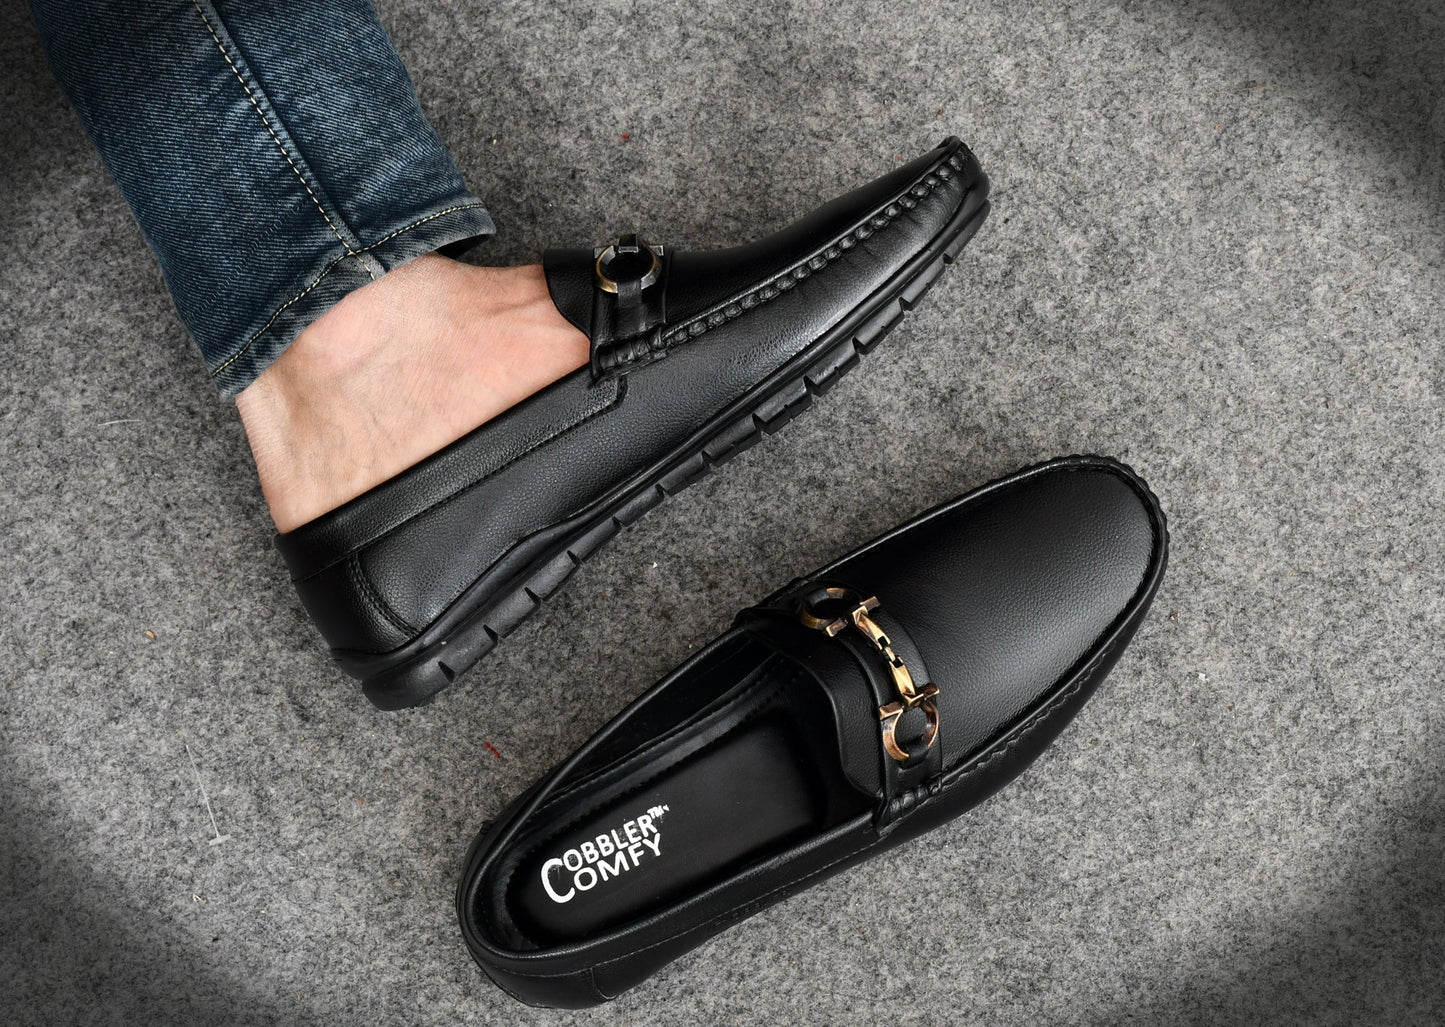 Classic Loafers for Men with Metallic Buckle  Black